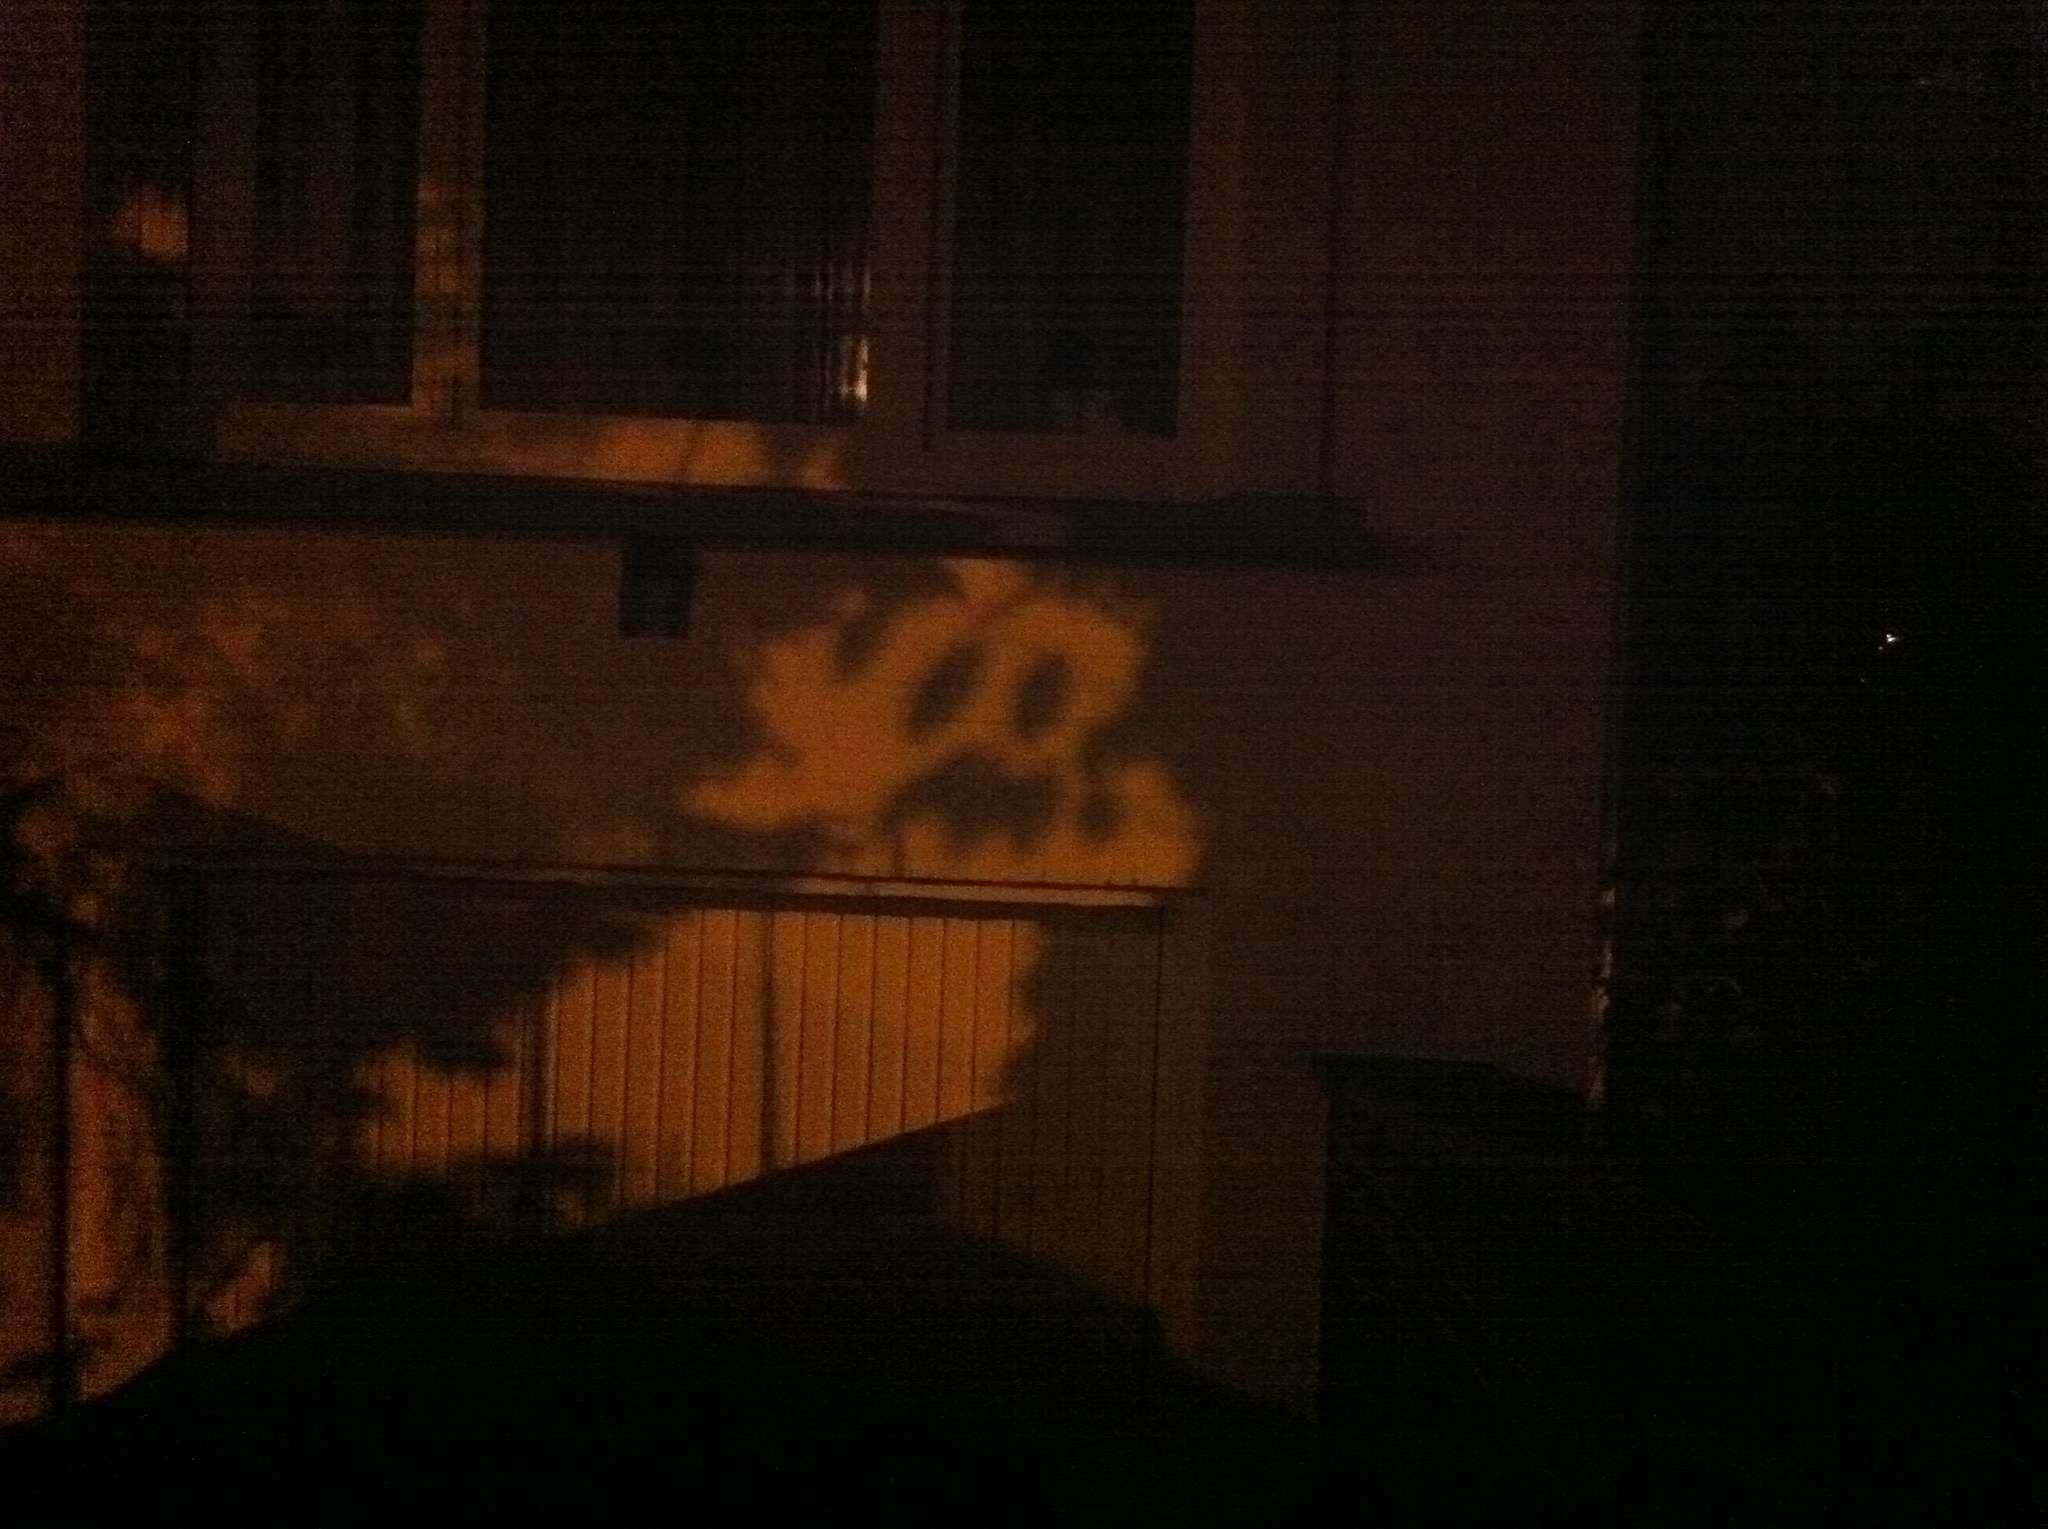 Streetlight through the trees on his driveway showed a ghost on my neighbor's garage door.